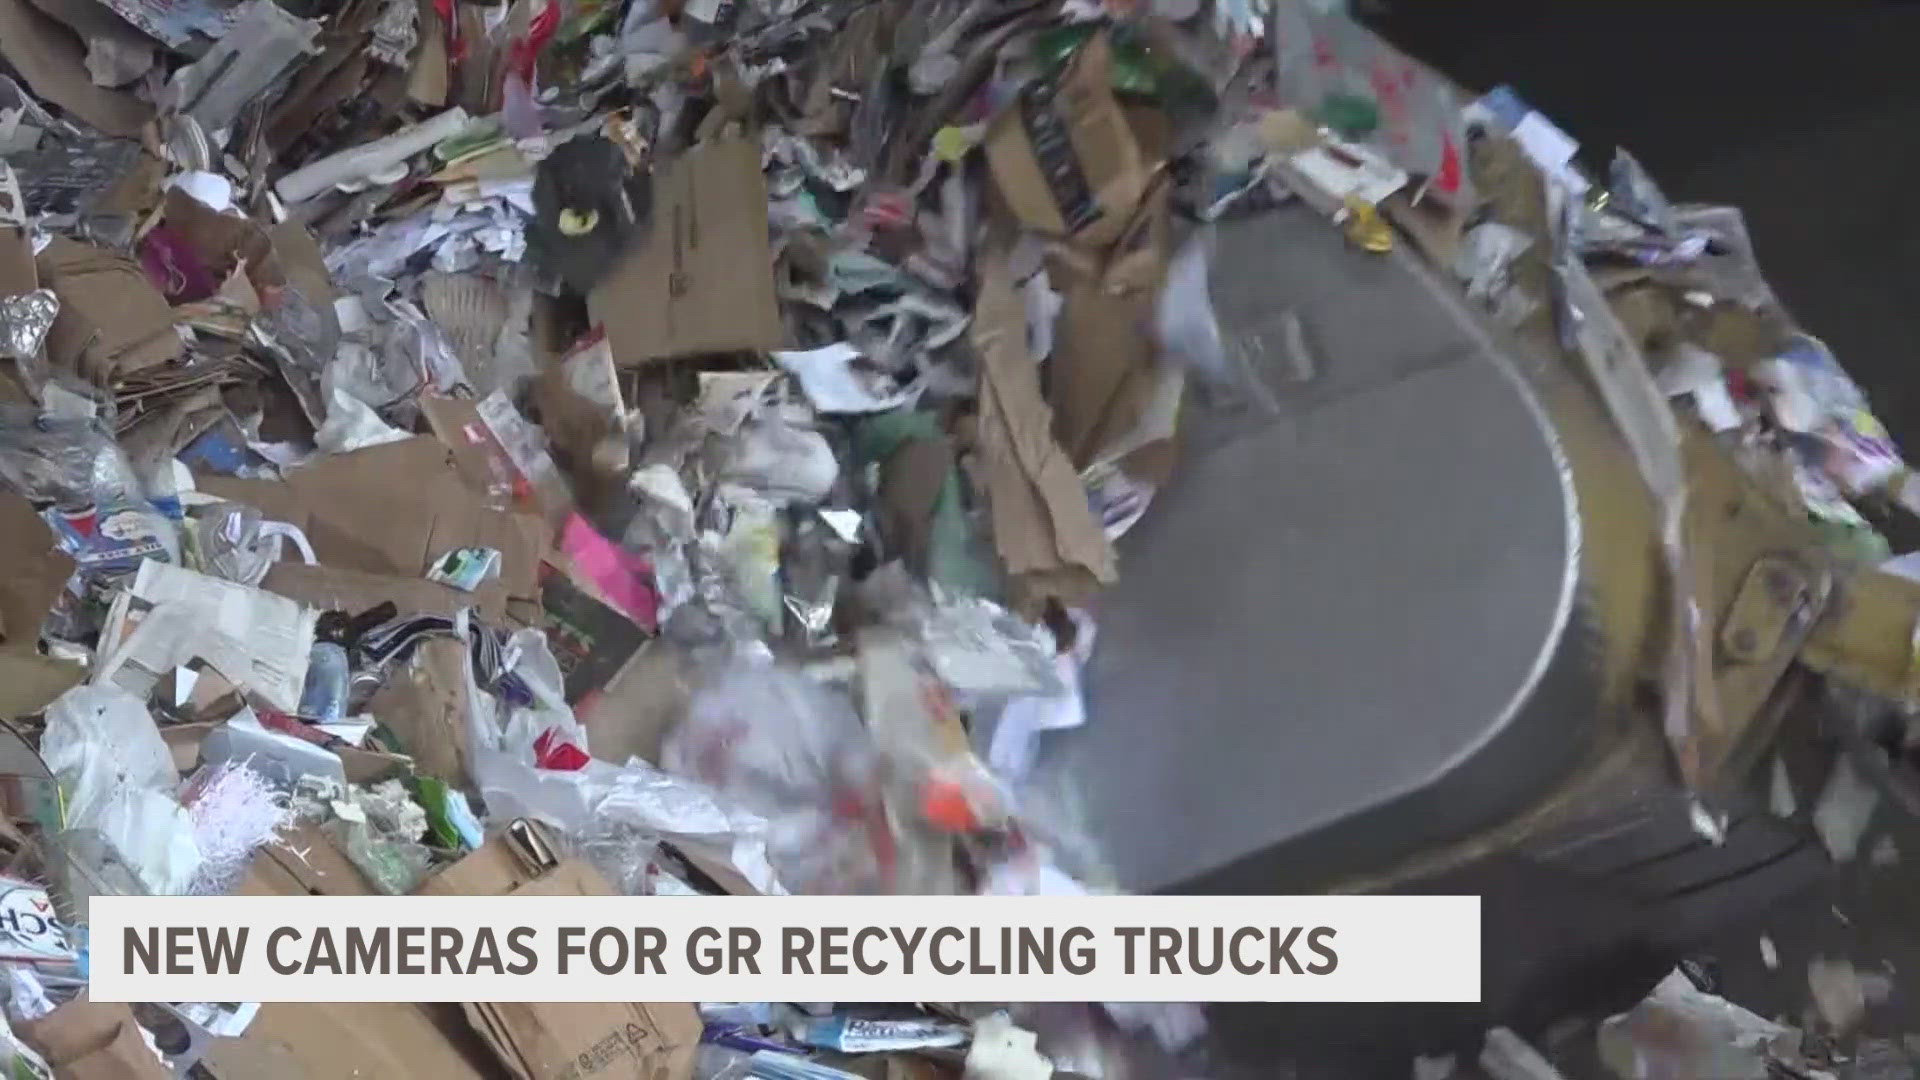 The cameras are located on the hopper of the recycling trucks. They are programmed to identify contaminants, so staff can send a note to homeowners for education.